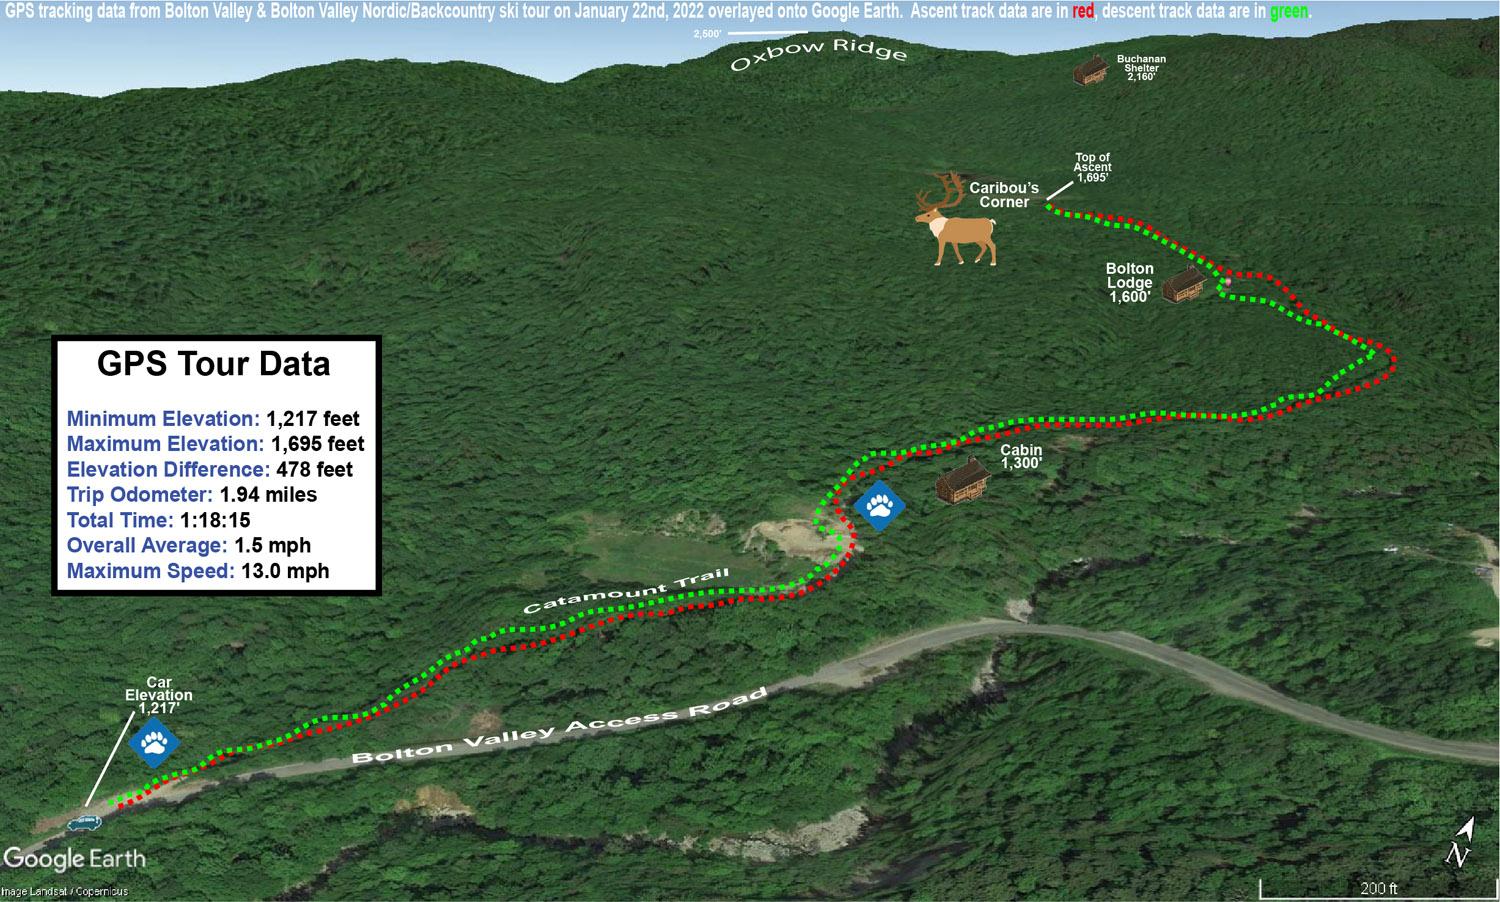 A Google Earth map with GPS tracking data for a ski tour on the Nordic & Backcountry Network at Bolton Valley Resort in Vermont